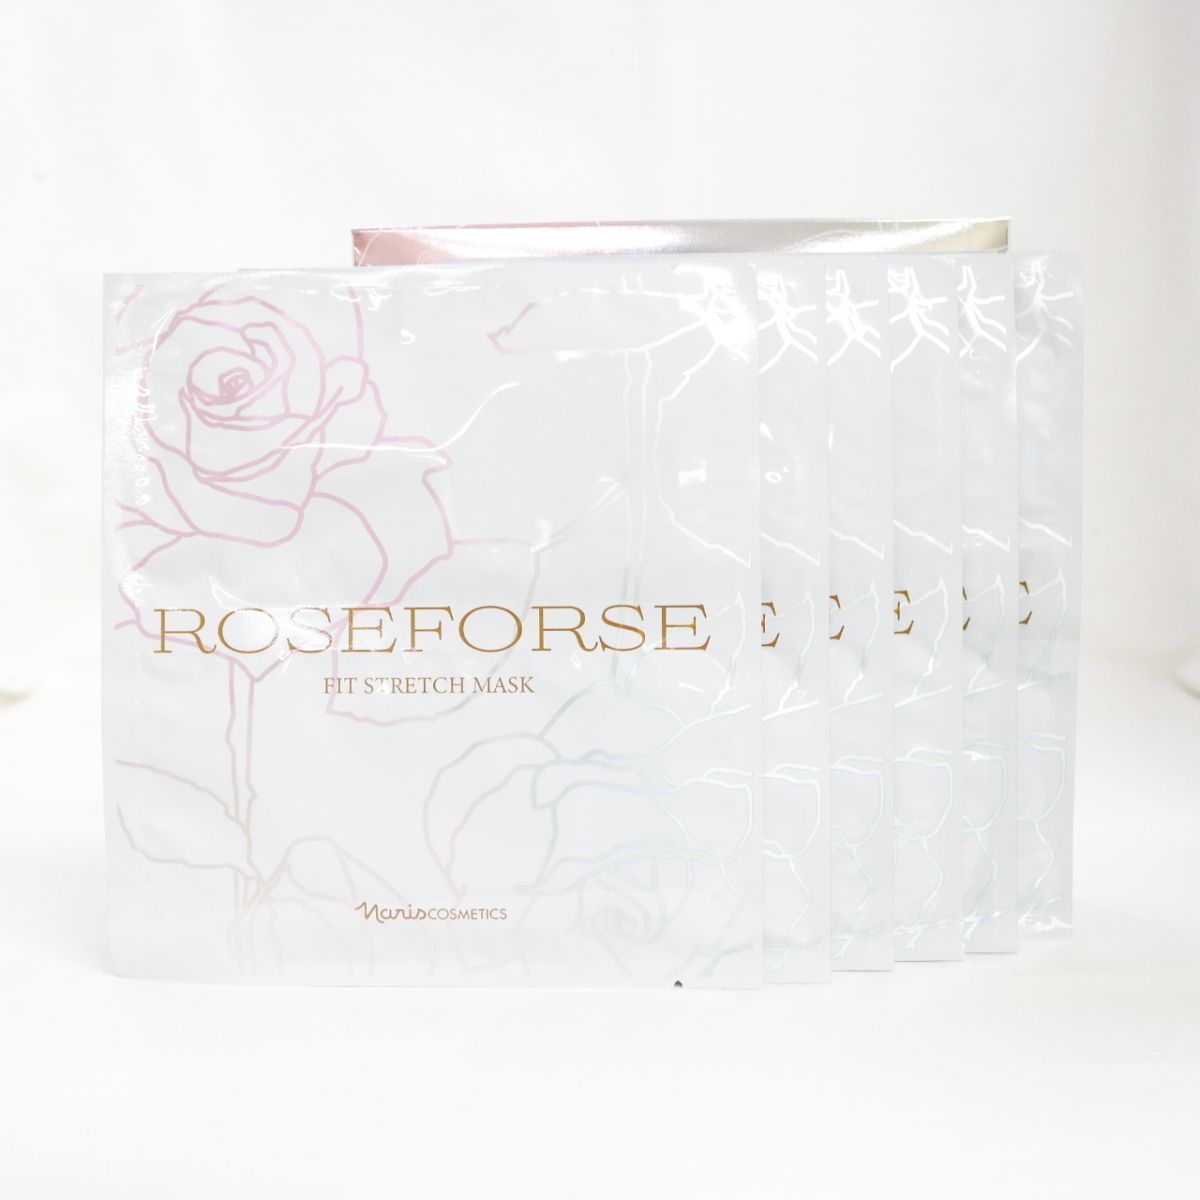 * new goods Naris cosmetics Naris rose force Fit stretch mask ( height moisturizer mask ) 26mL×6 set ( 0116-n1 )